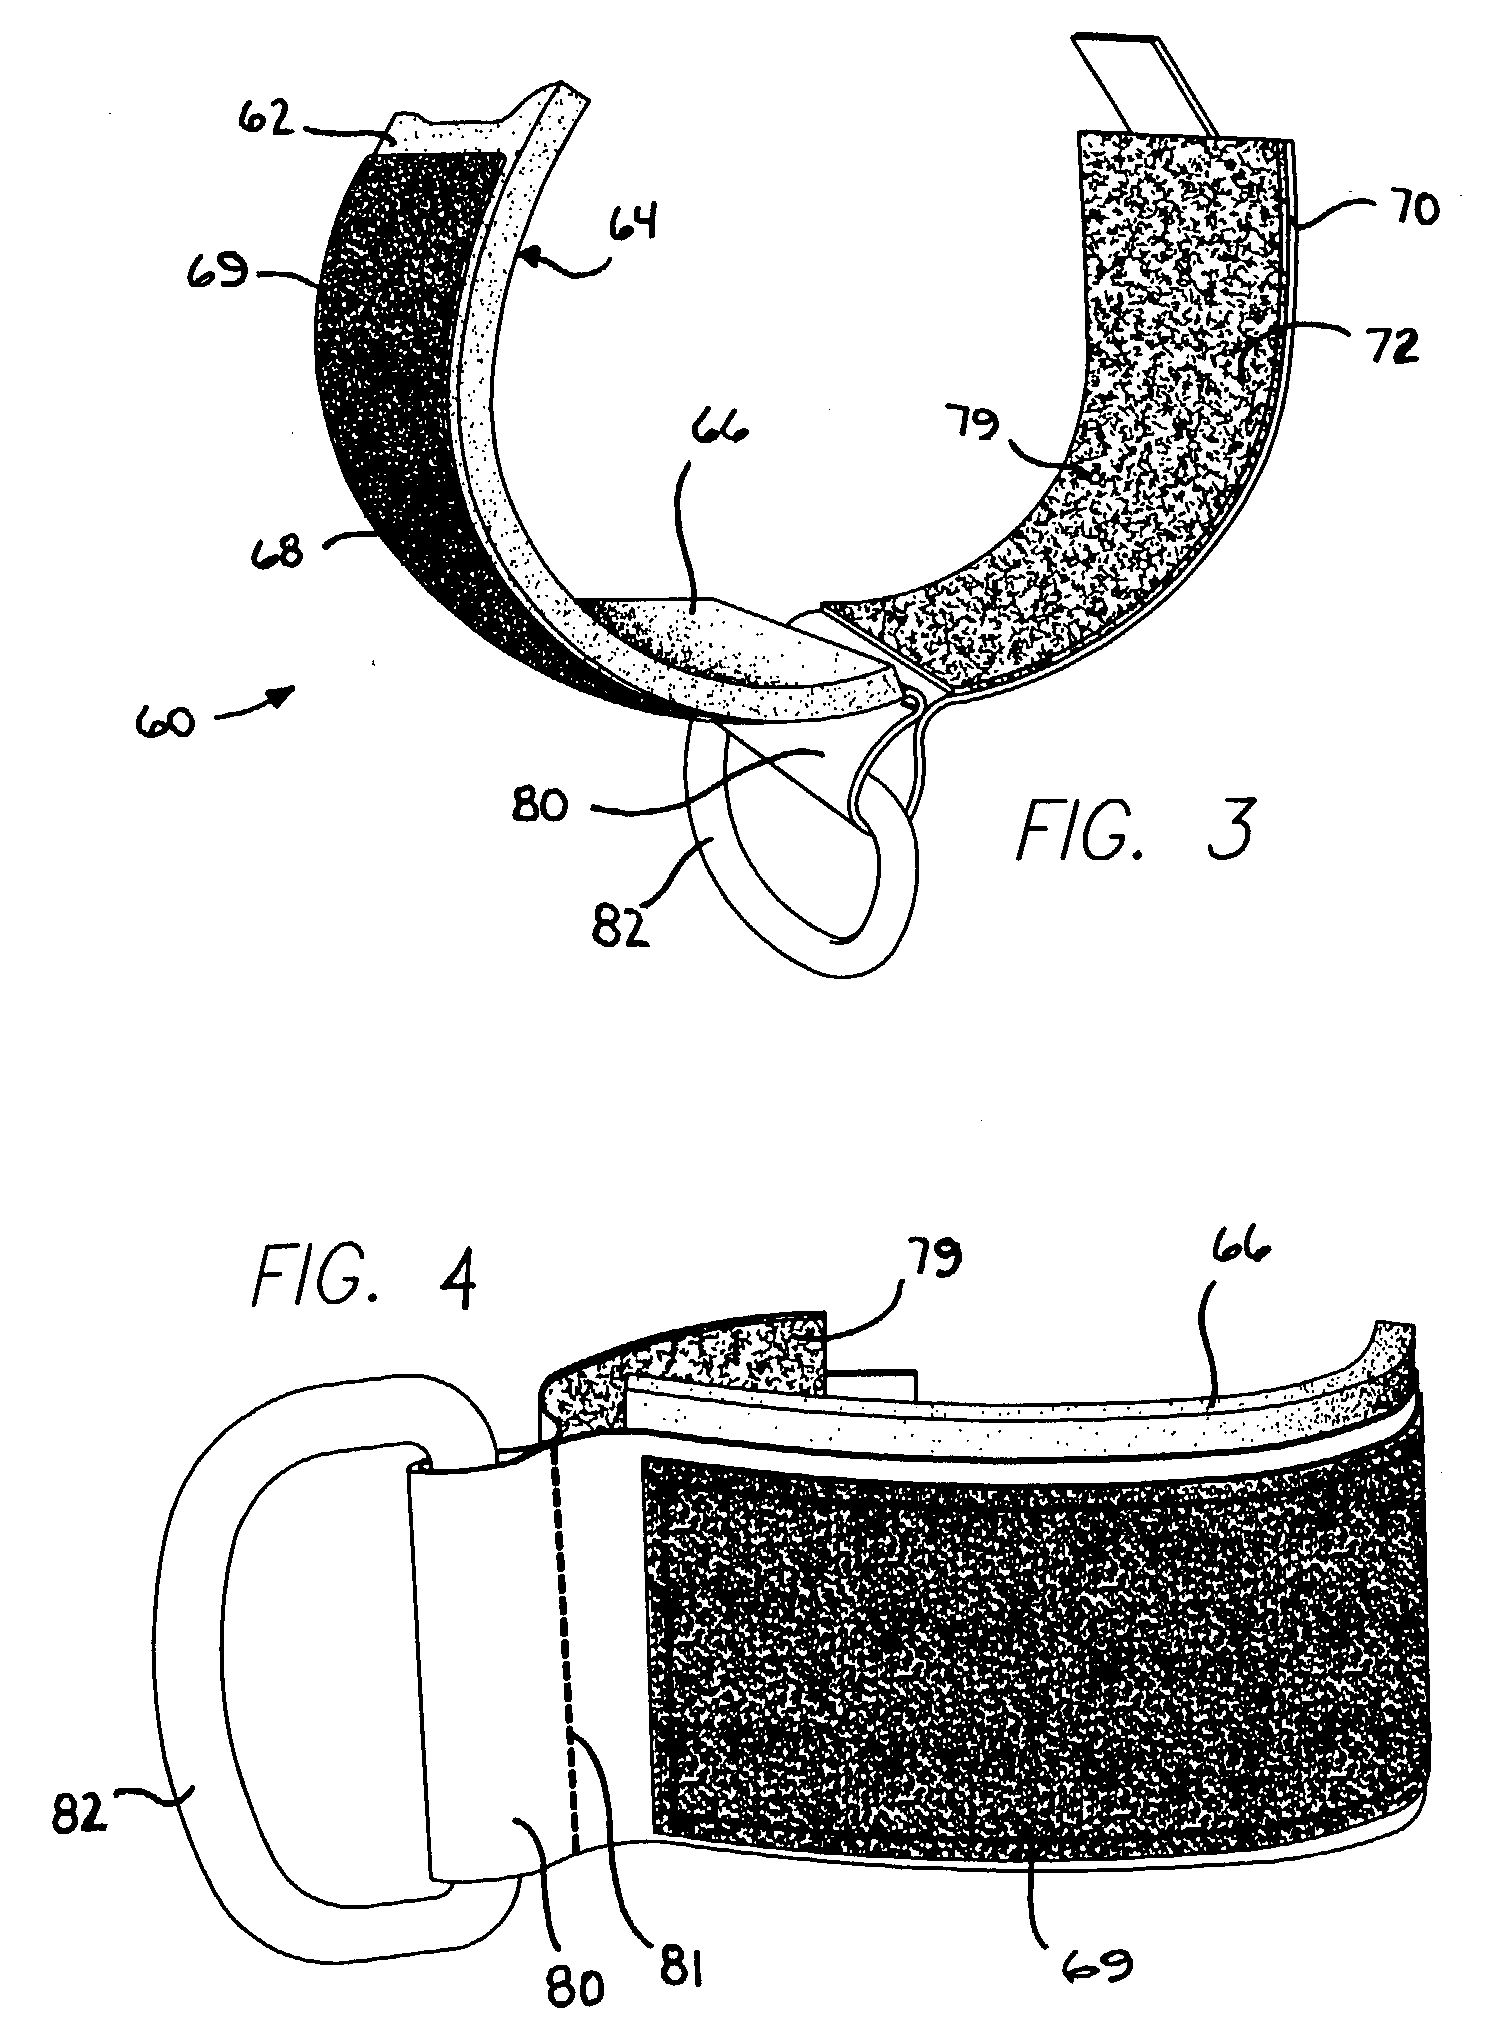 Portable exercise apparatus and method